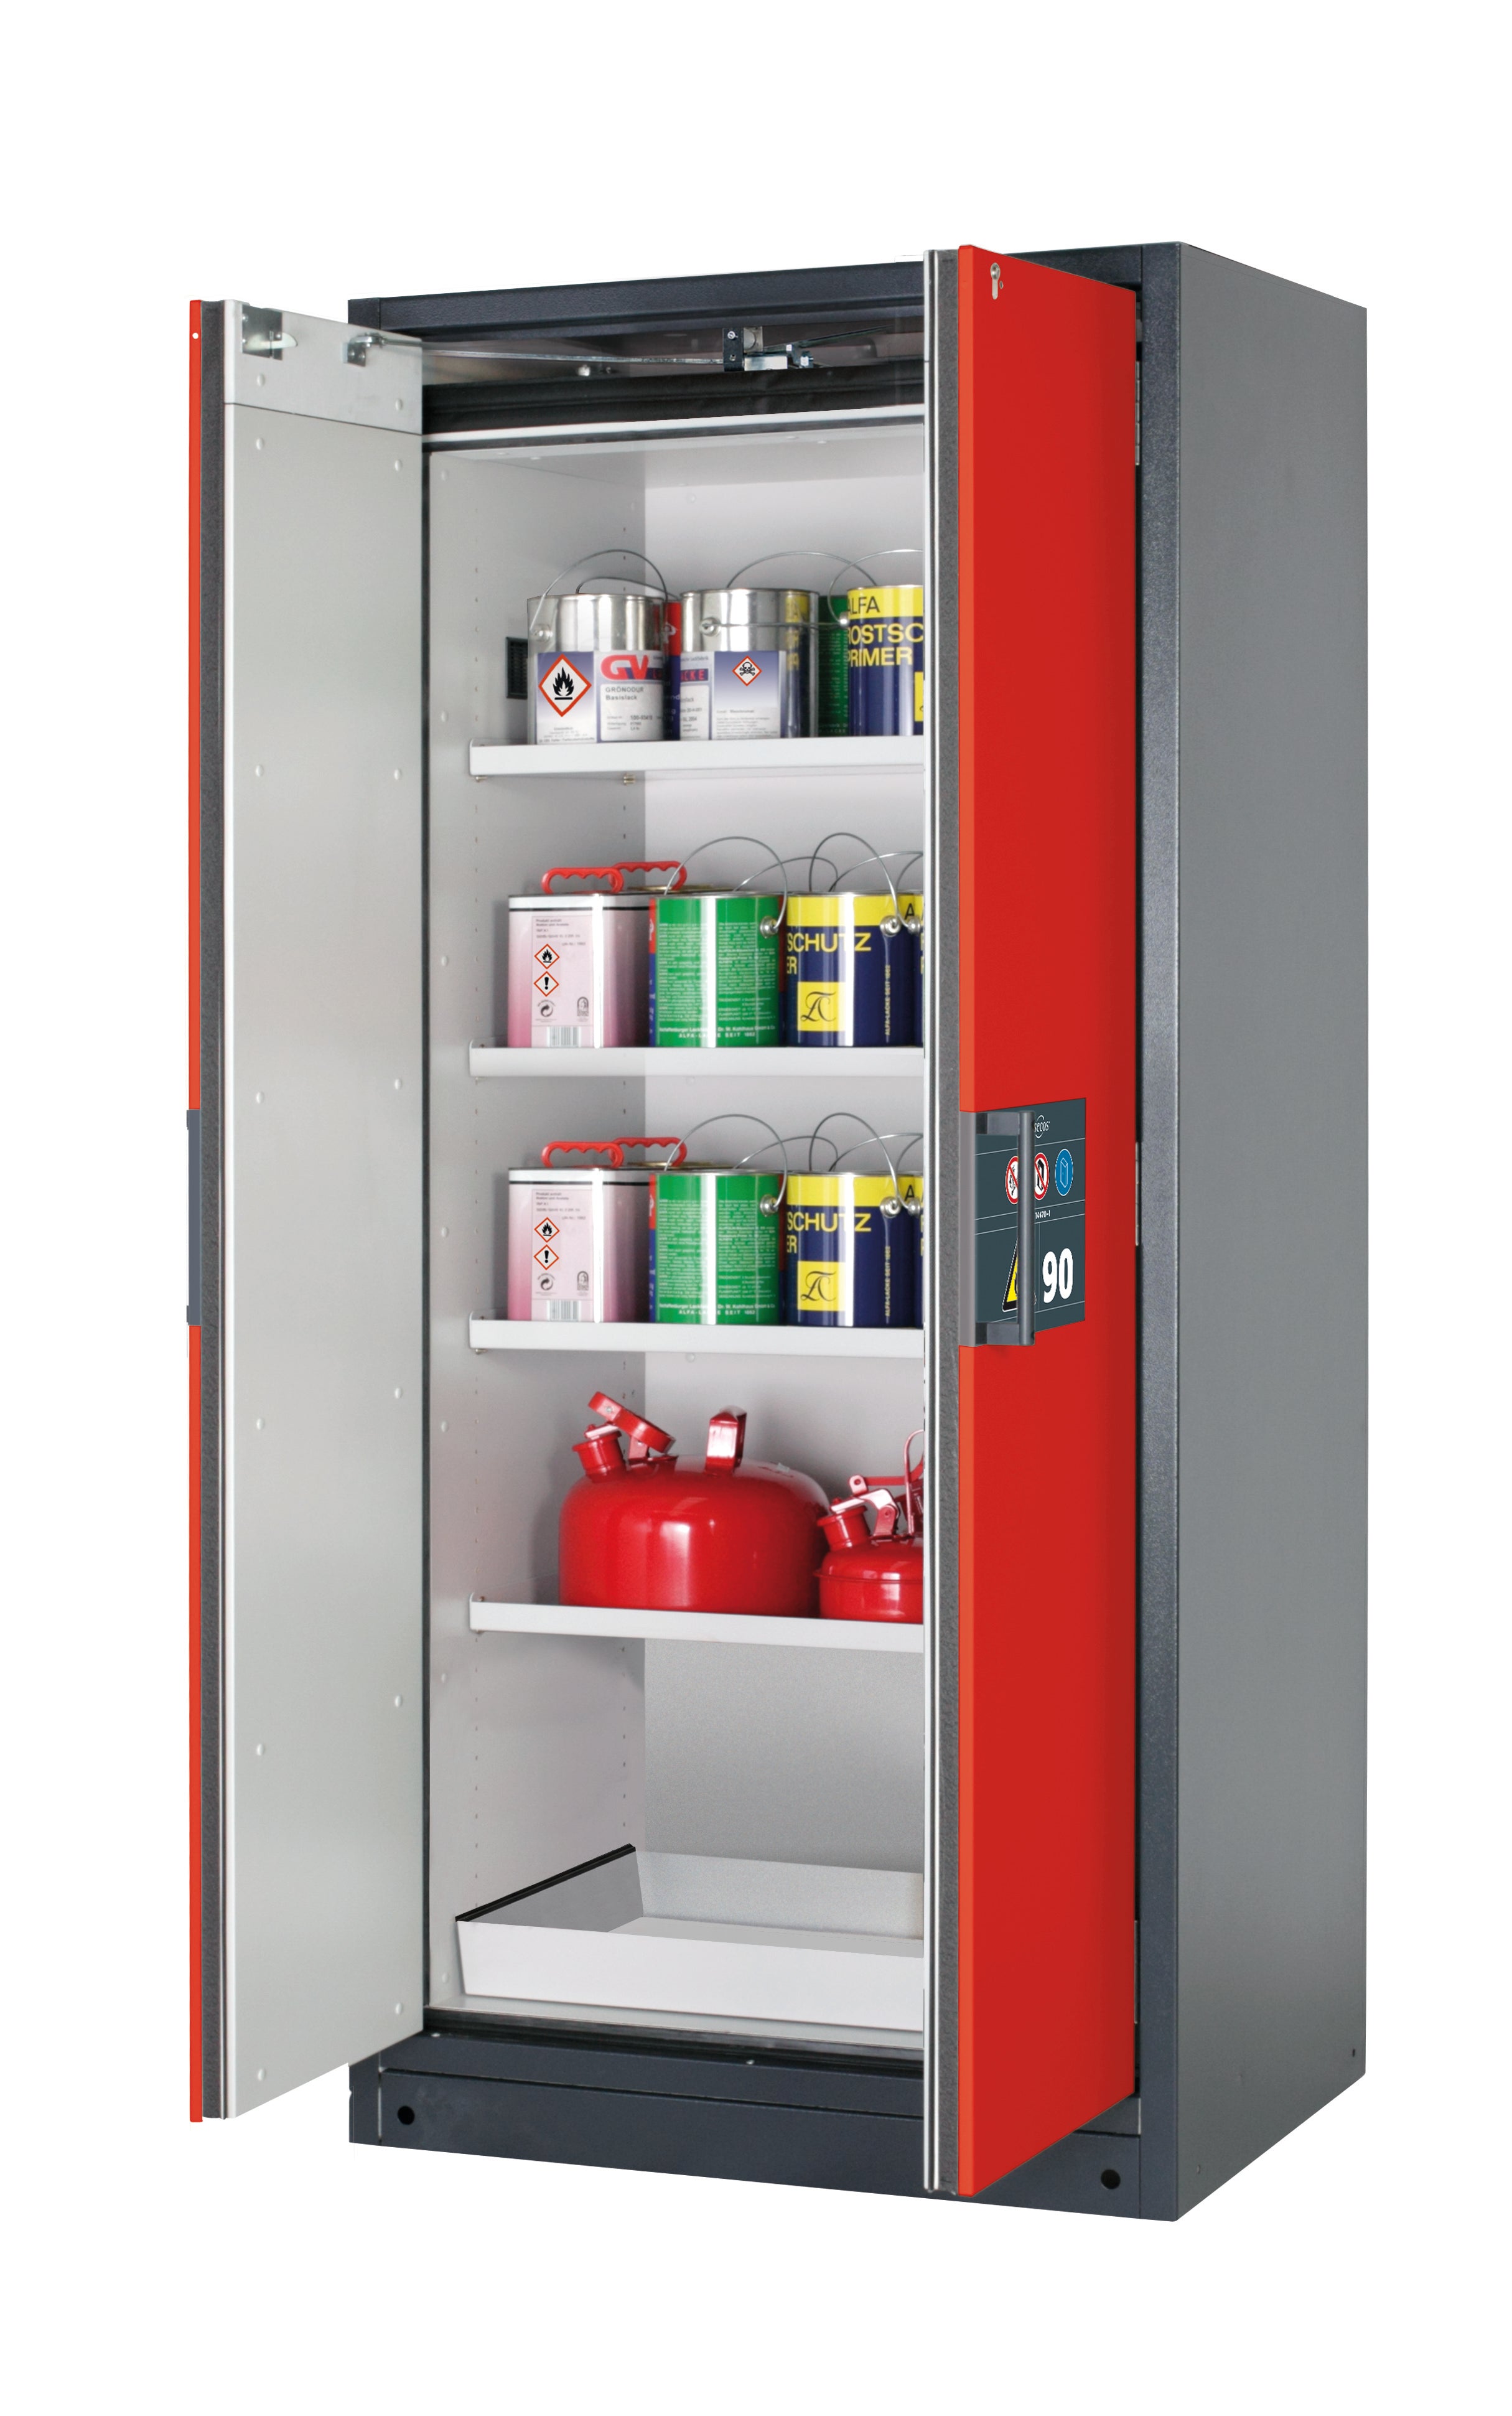 Type 90 safety storage cabinet Q-PEGASUS-90 model Q90.195.090.WDAC in traffic red RAL 3020 with 4x shelf standard (sheet steel),